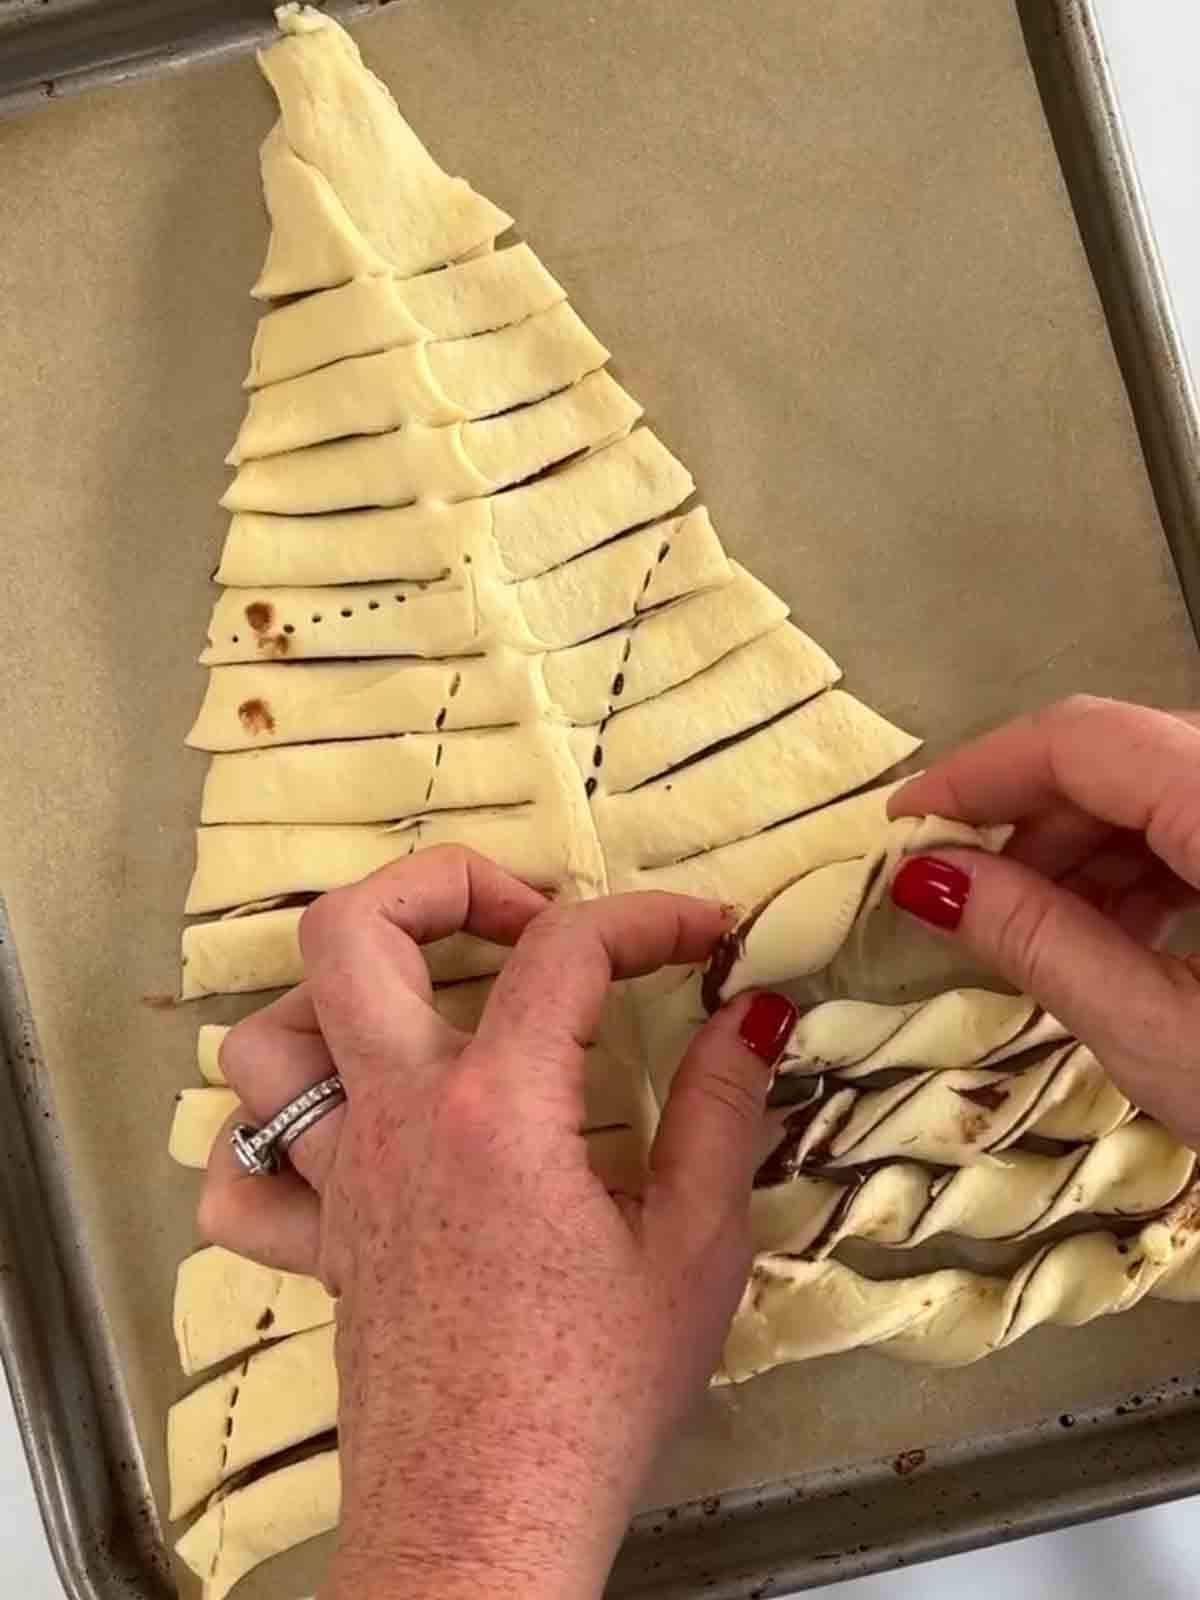 A triangle of croissant dough with strips in the sides, with two hands twisting the strips. For the recipe Nutella Christmas Tree.